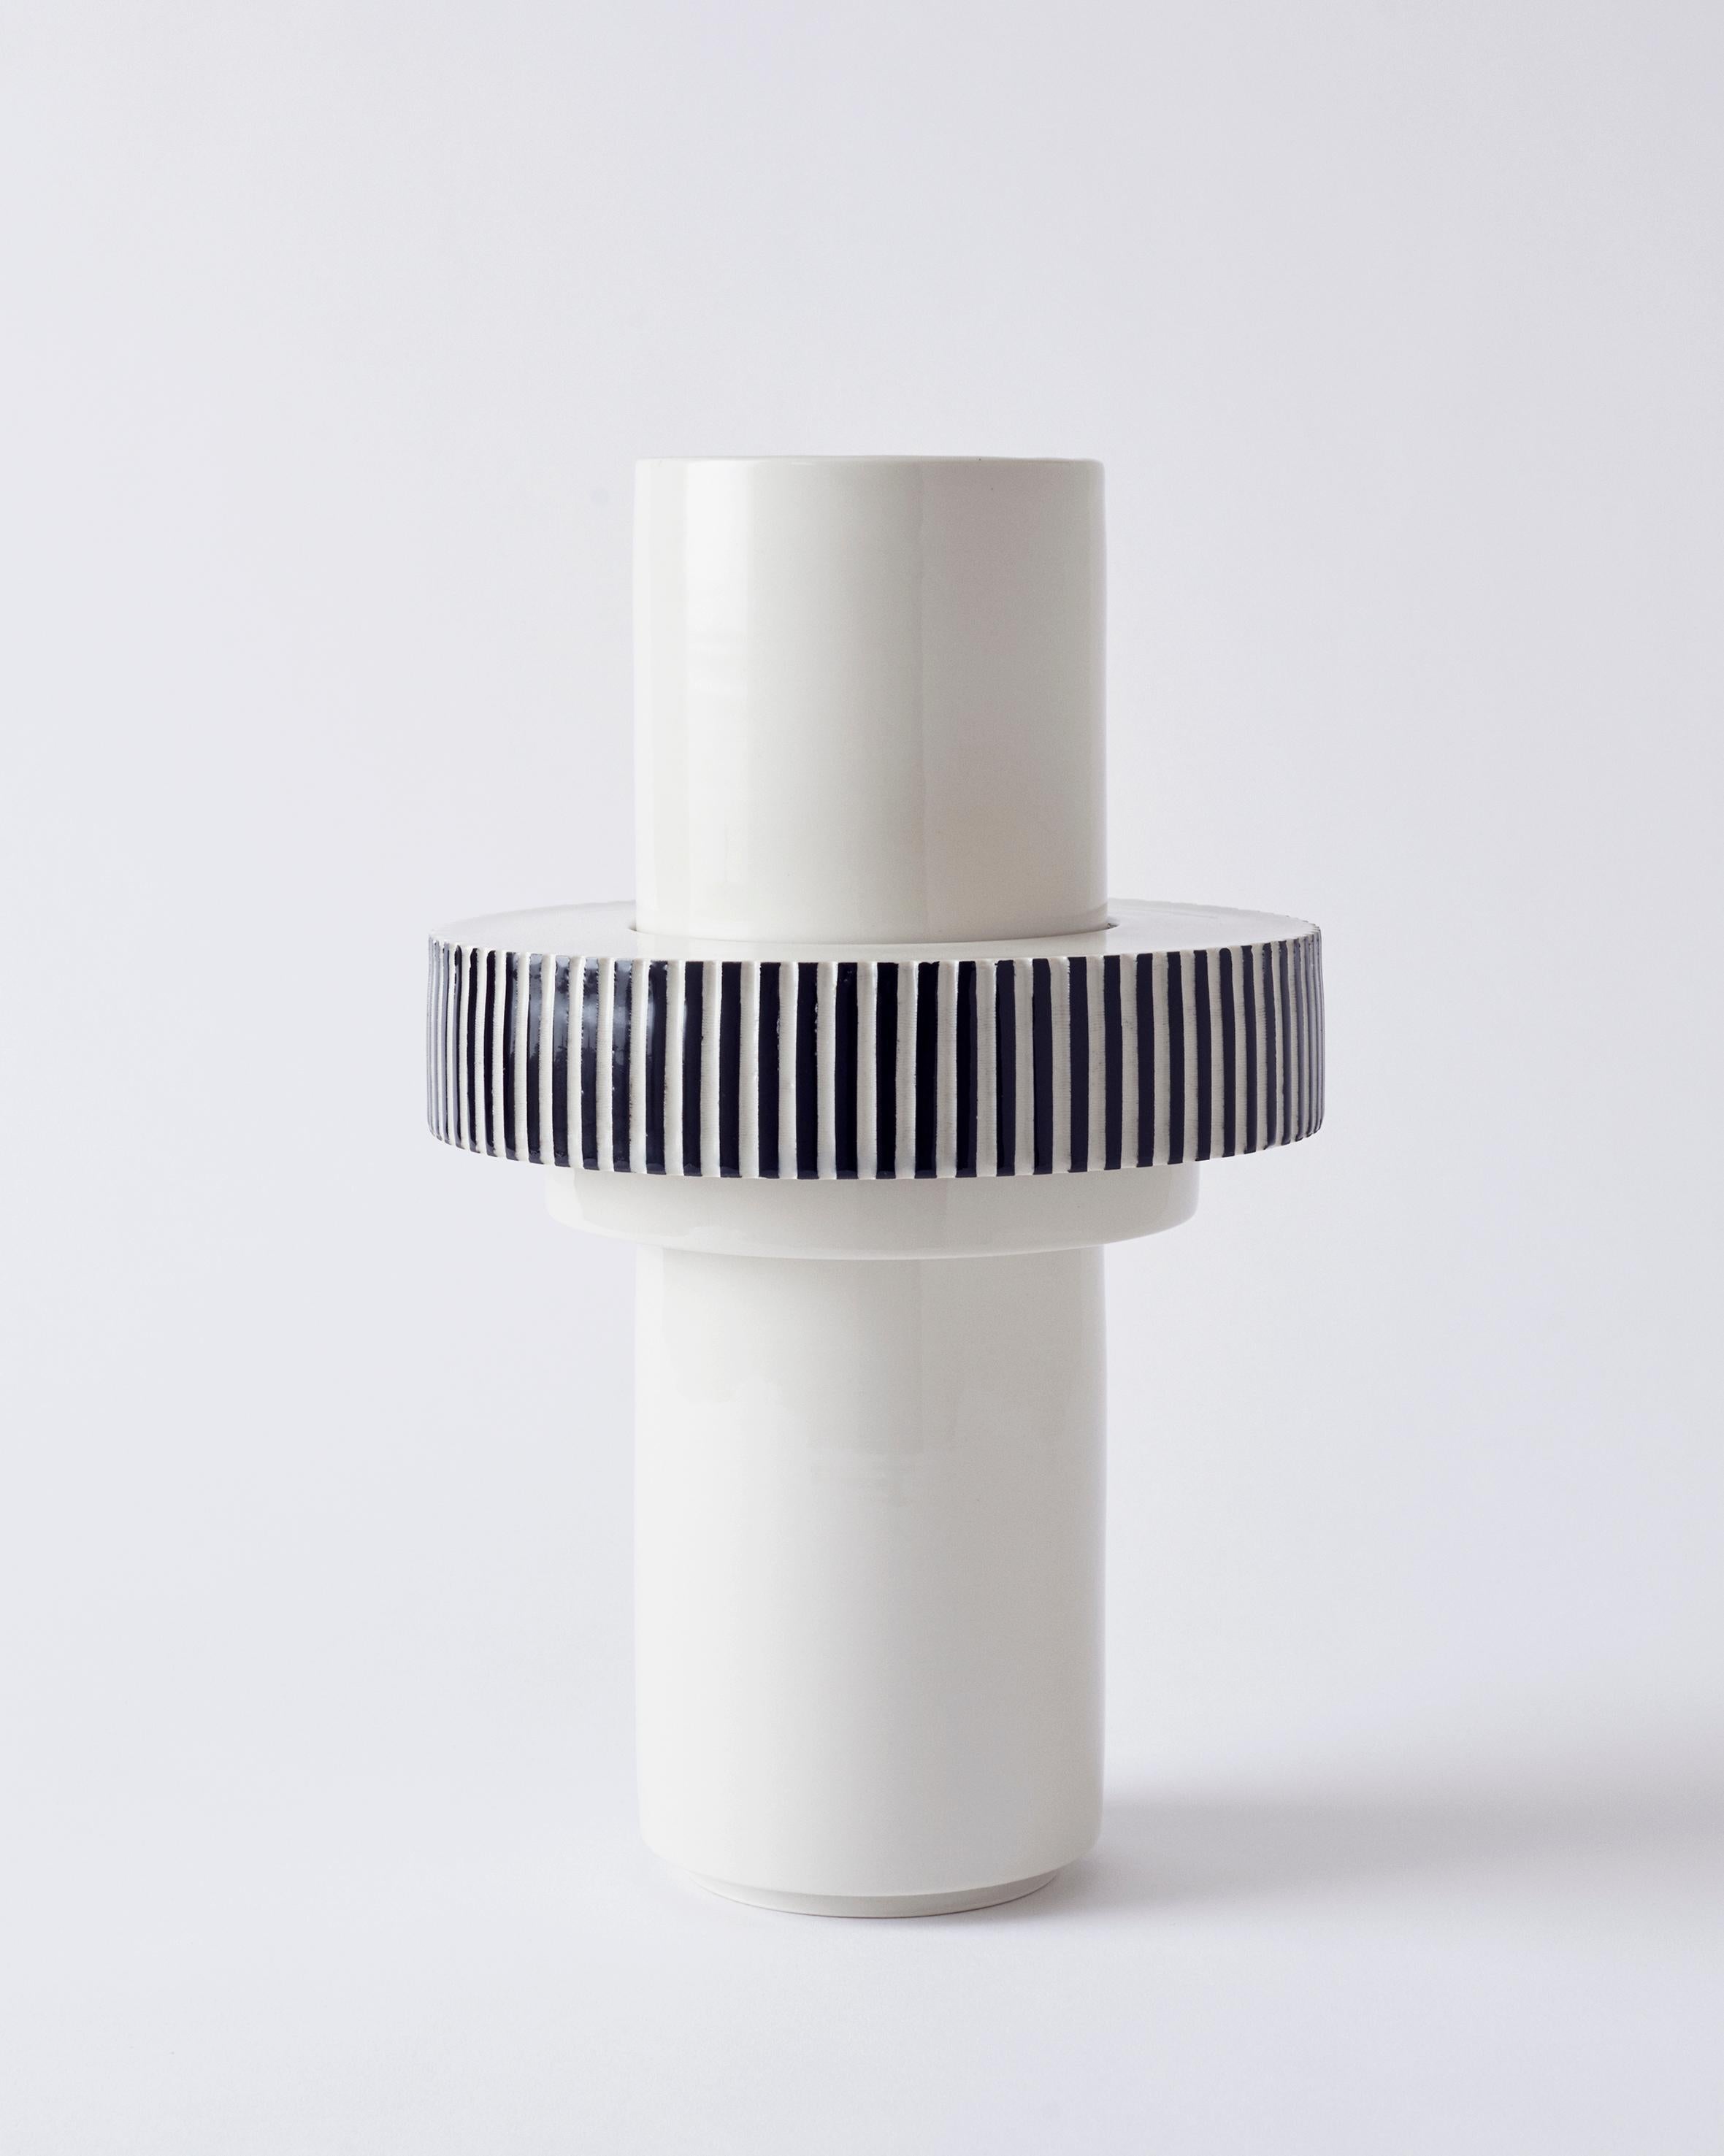 Handmade Porcelain Vase, Modular, Striped Ring, Contemporary, Modern In New Condition For Sale In Zurich, CH